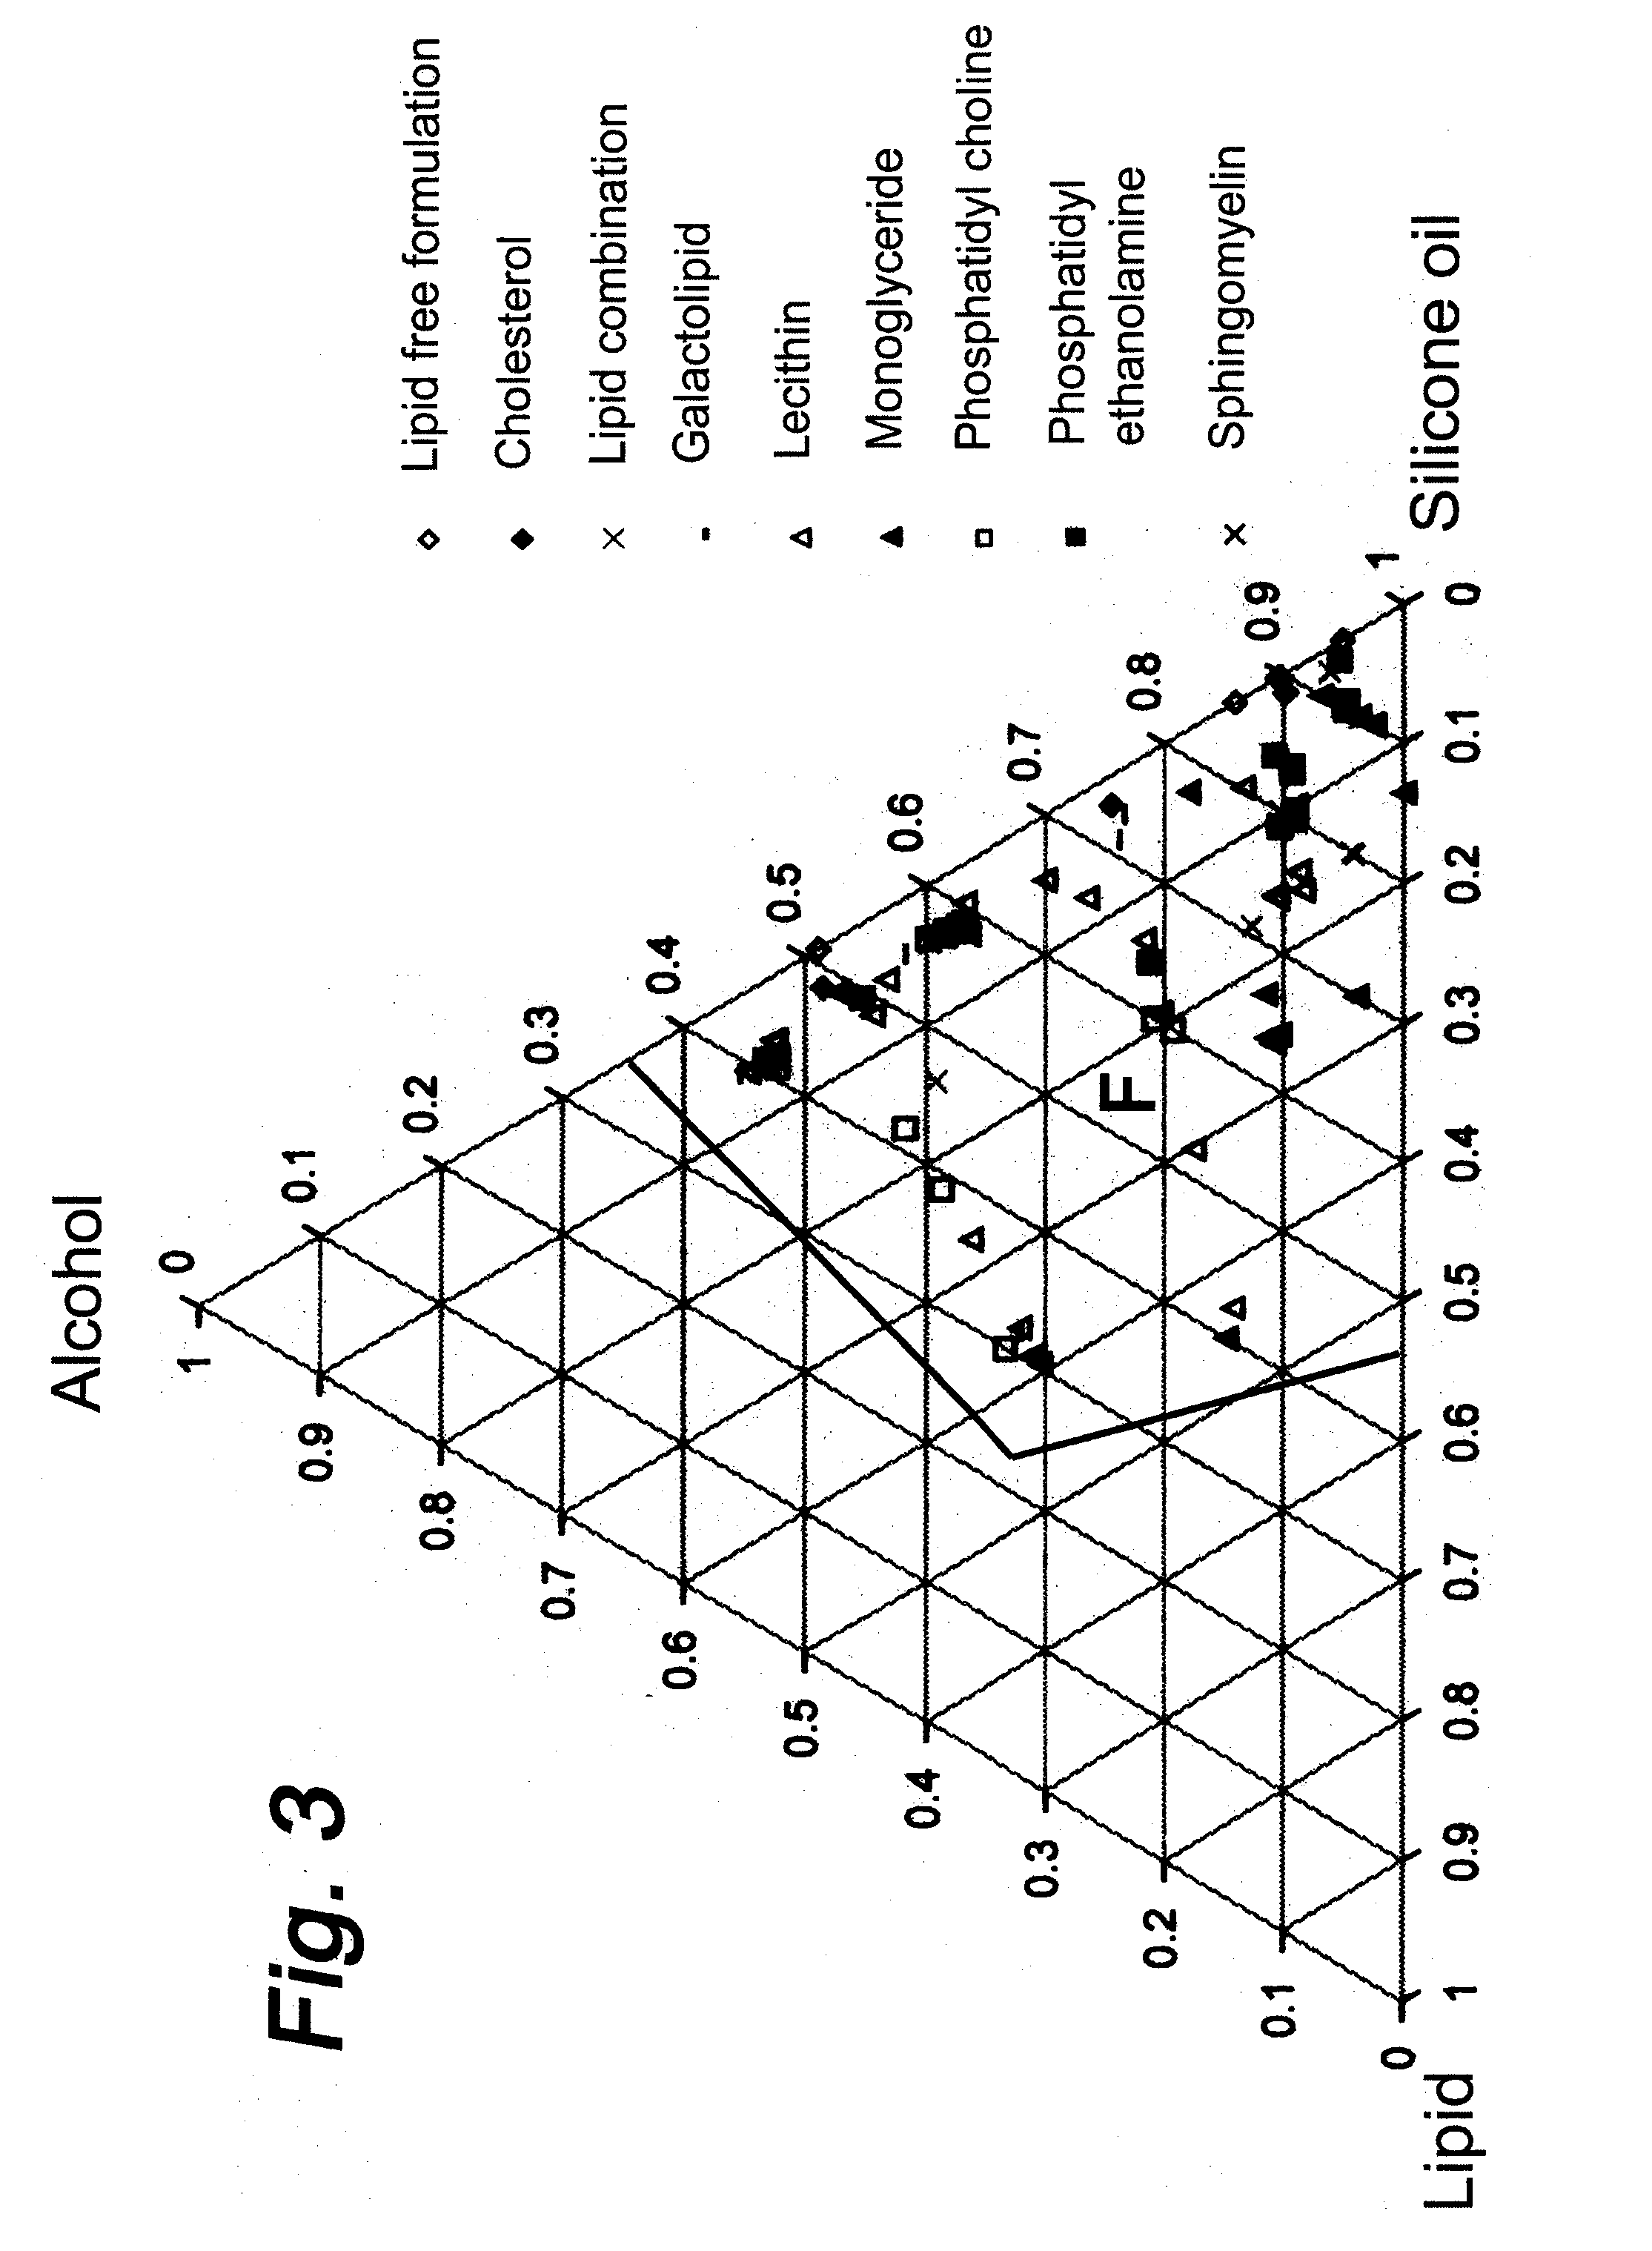 Lipid layer forming composition for administration onto a surface of a living organism